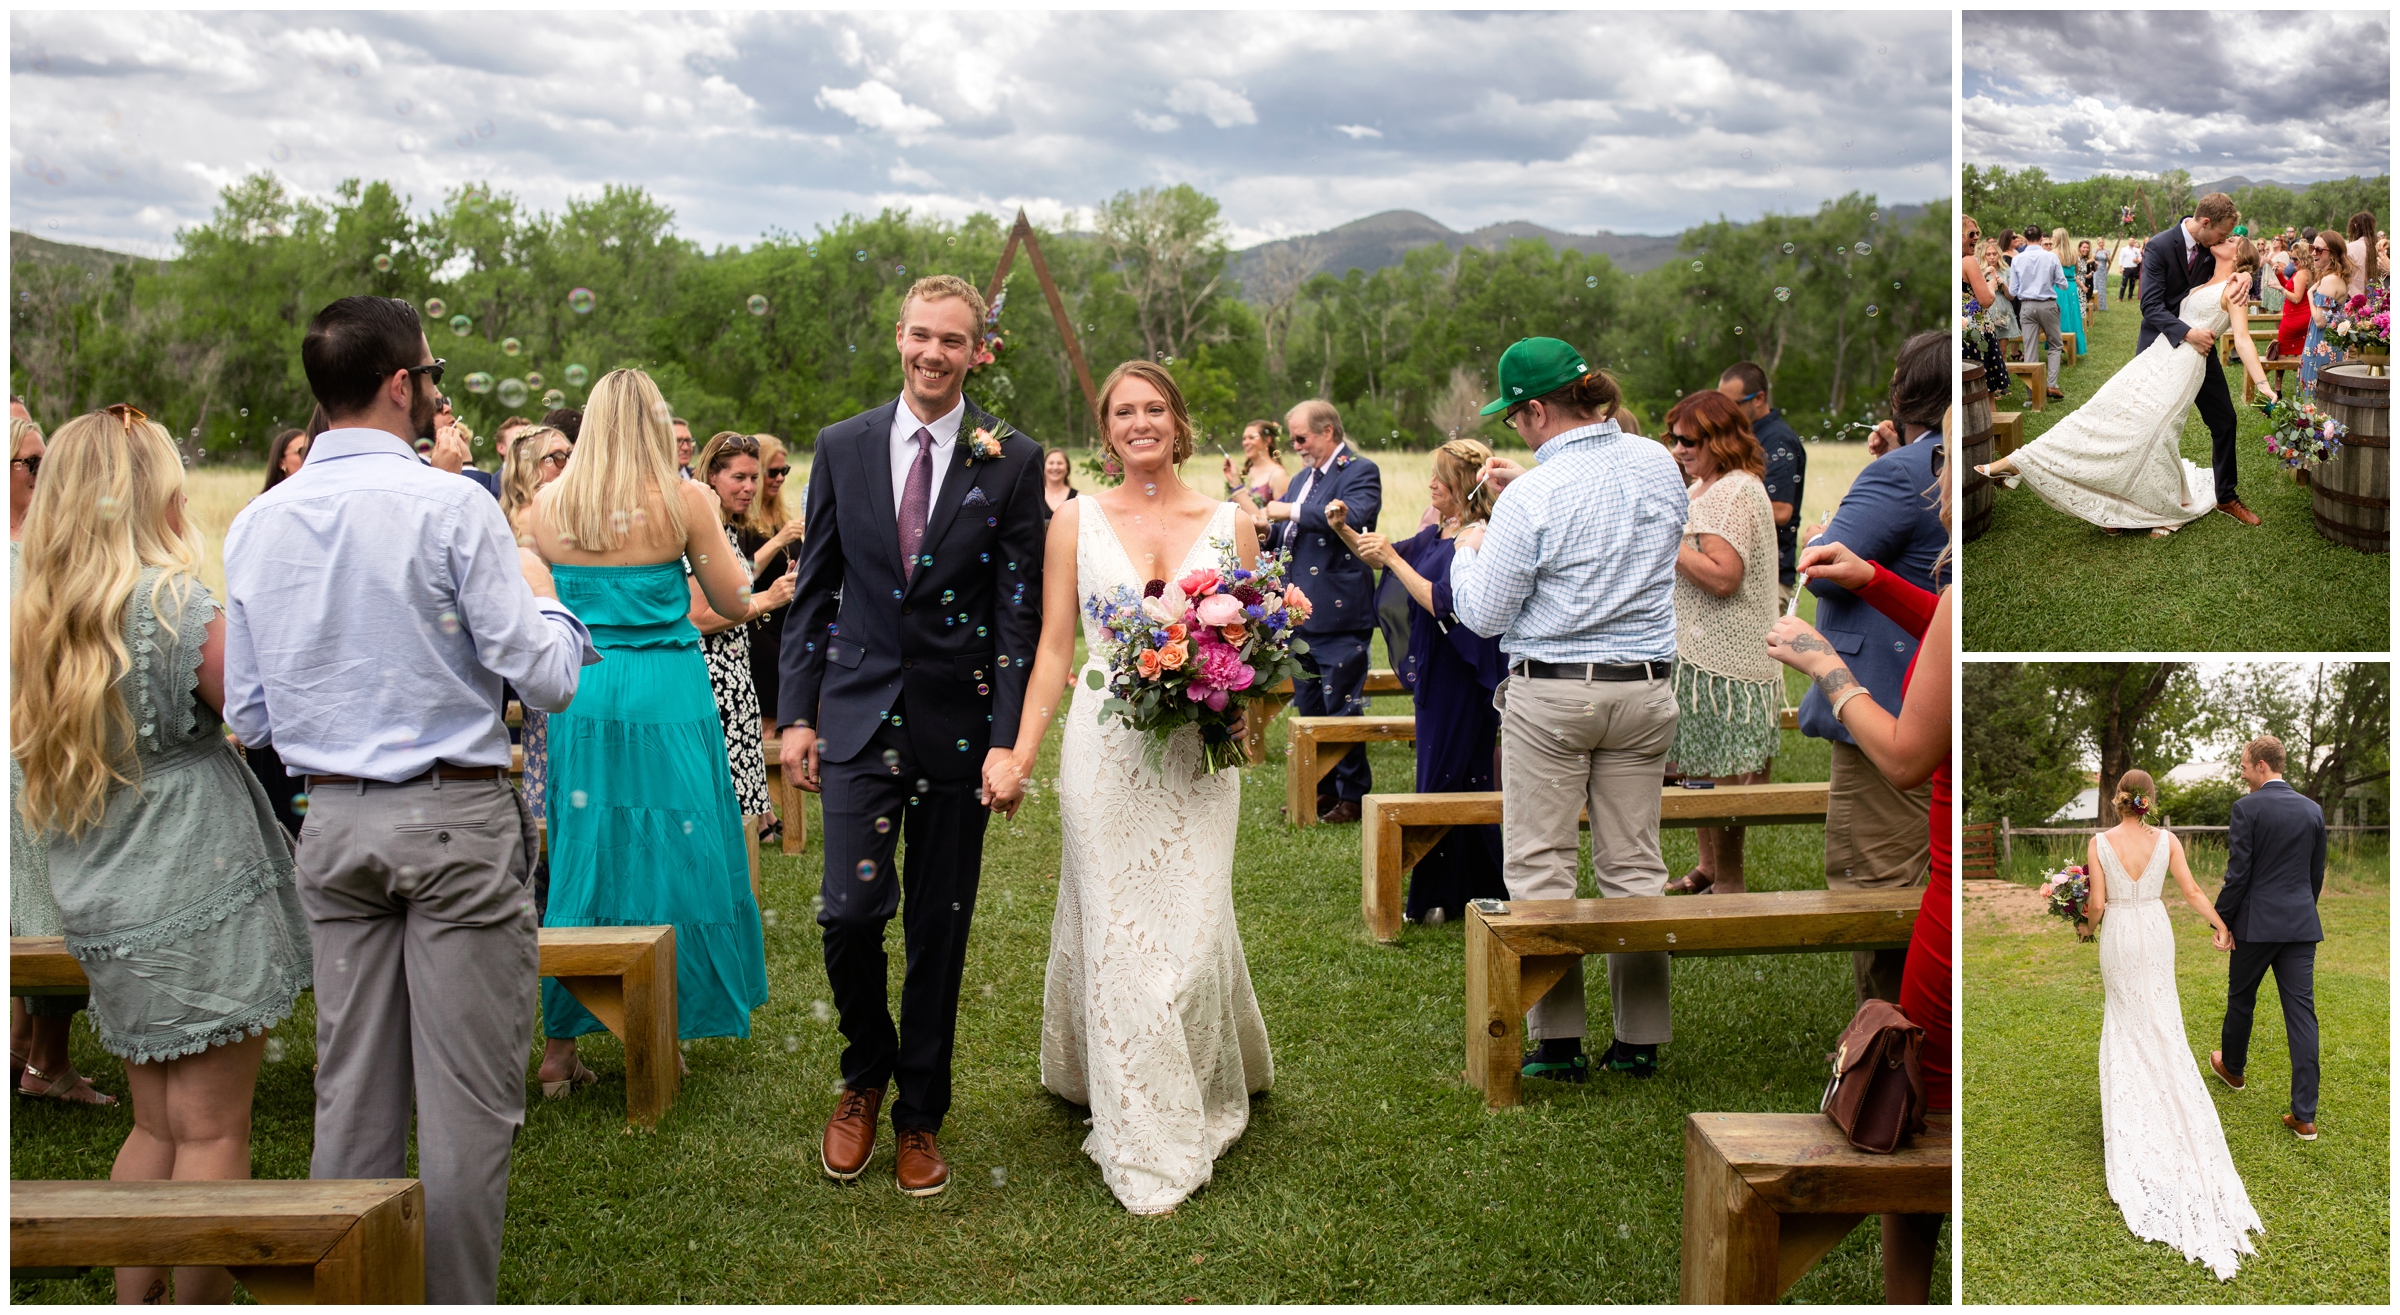 groom dipping bride at the end of the aisle after outdoor wedding ceremony at Rist Canyon Inn